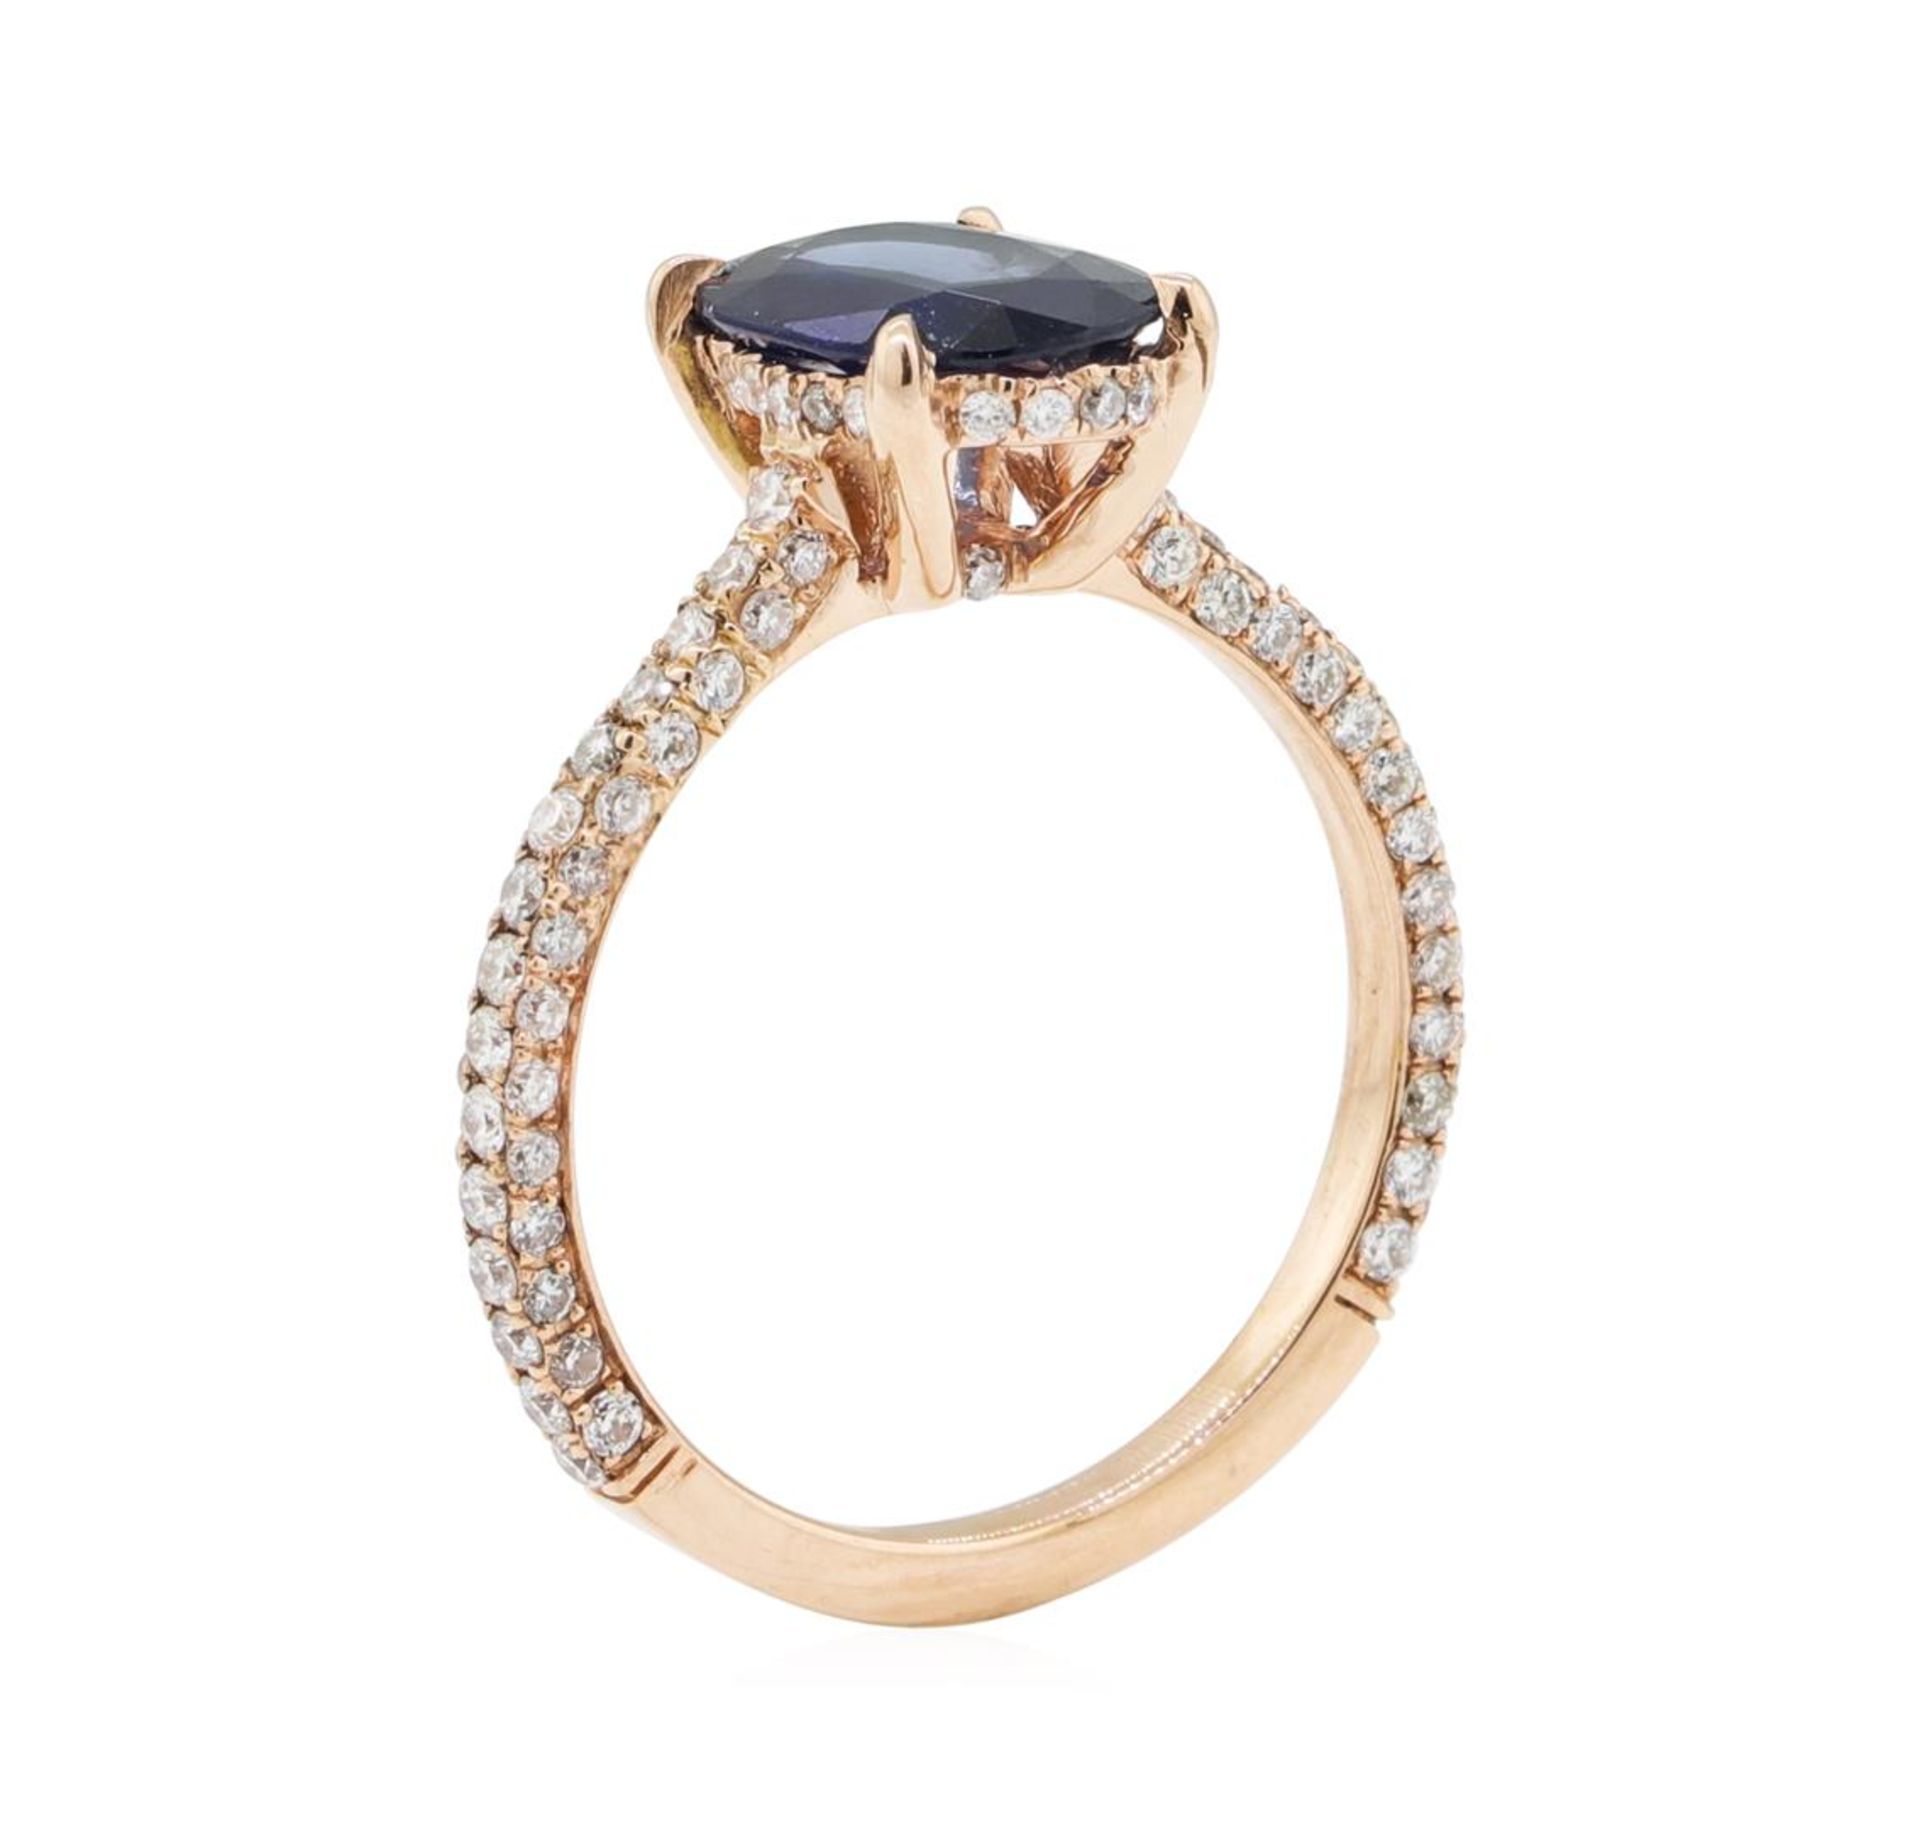 2.15 ctw Sapphire and Diamond Ring - 14KT Rose Gold - Image 4 of 5